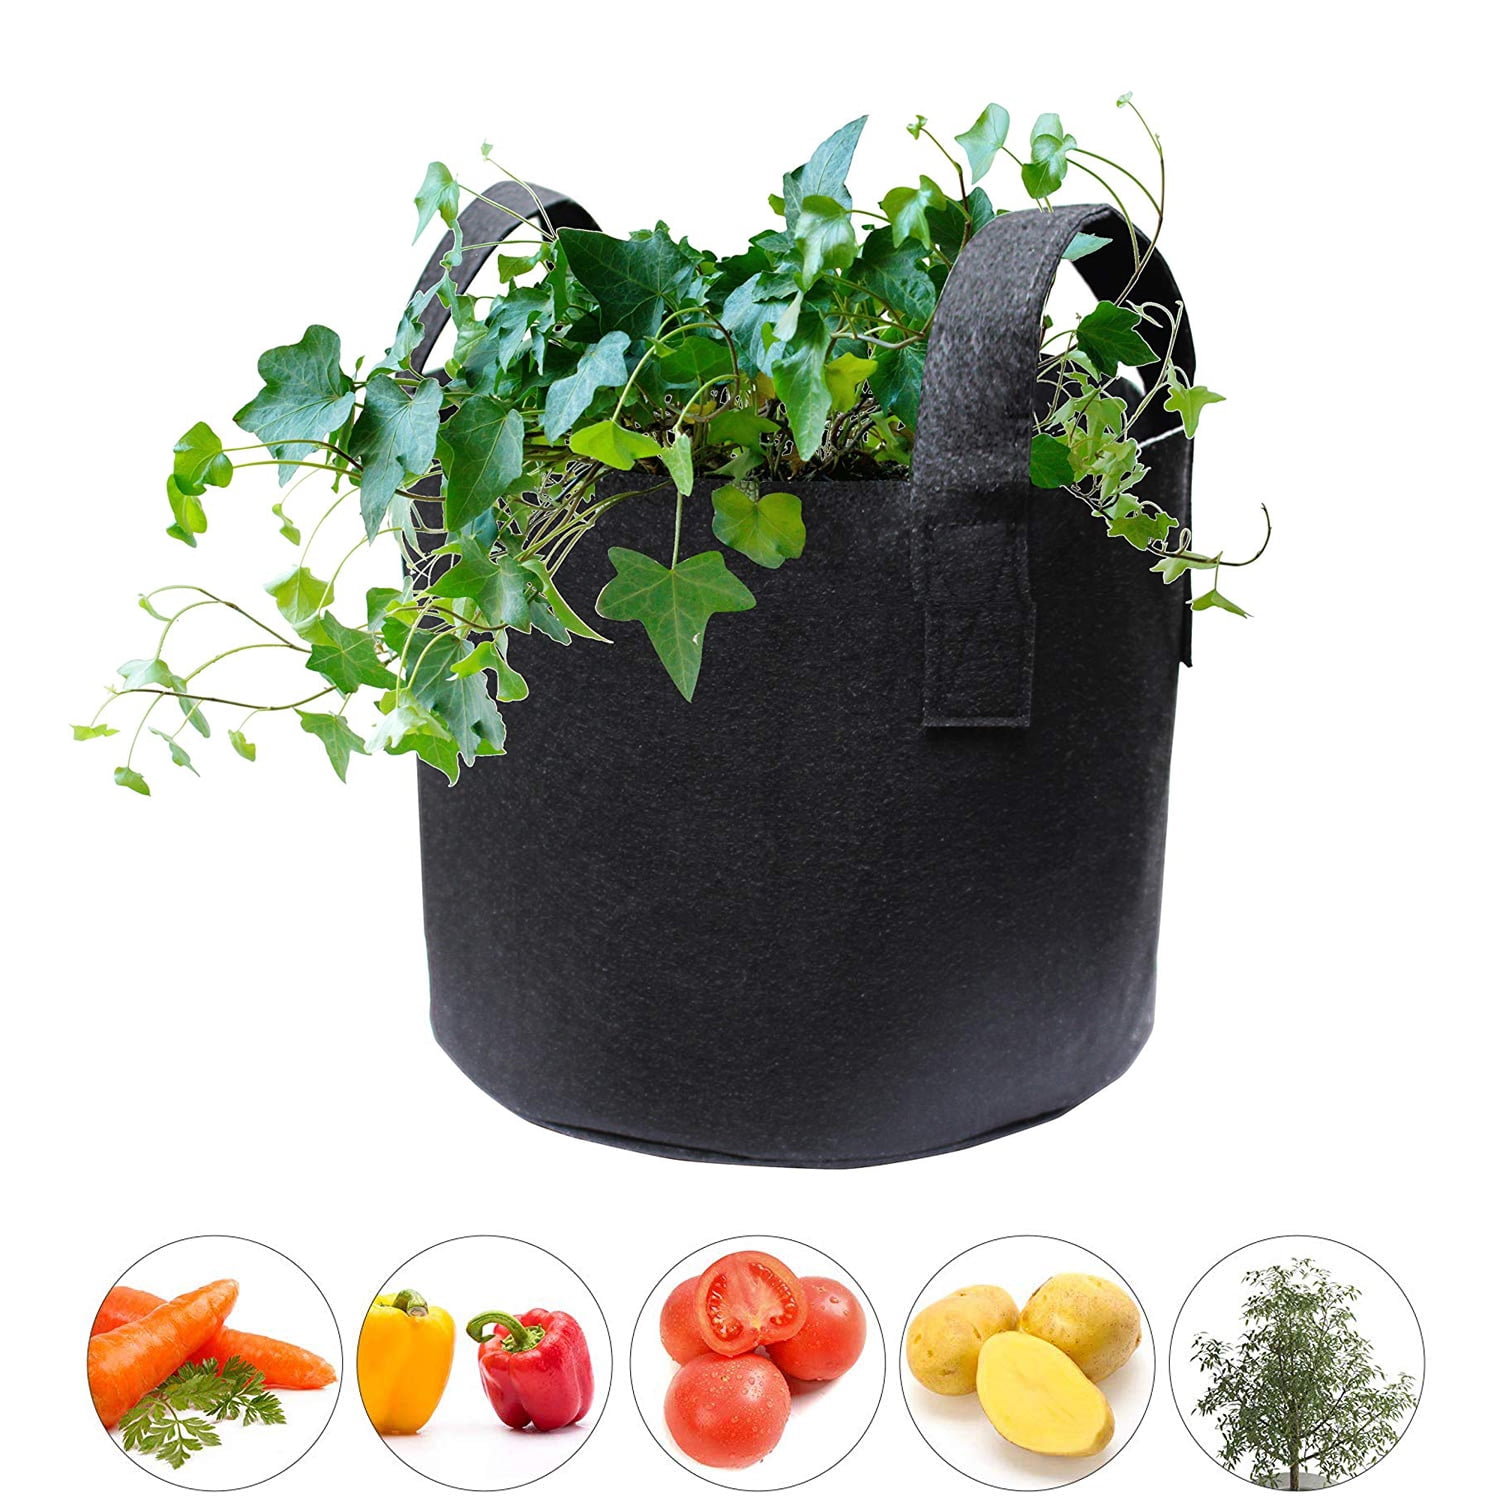 Black Heavy Duty Thickened Non-Woven Aeration Fabric Plant Pots with Handles Gardening Plant Growing Bags for Vegetable/Flower/Plant/Fruits LITLANDSTAR 12 Pack 5 Gallon Grow Bags 